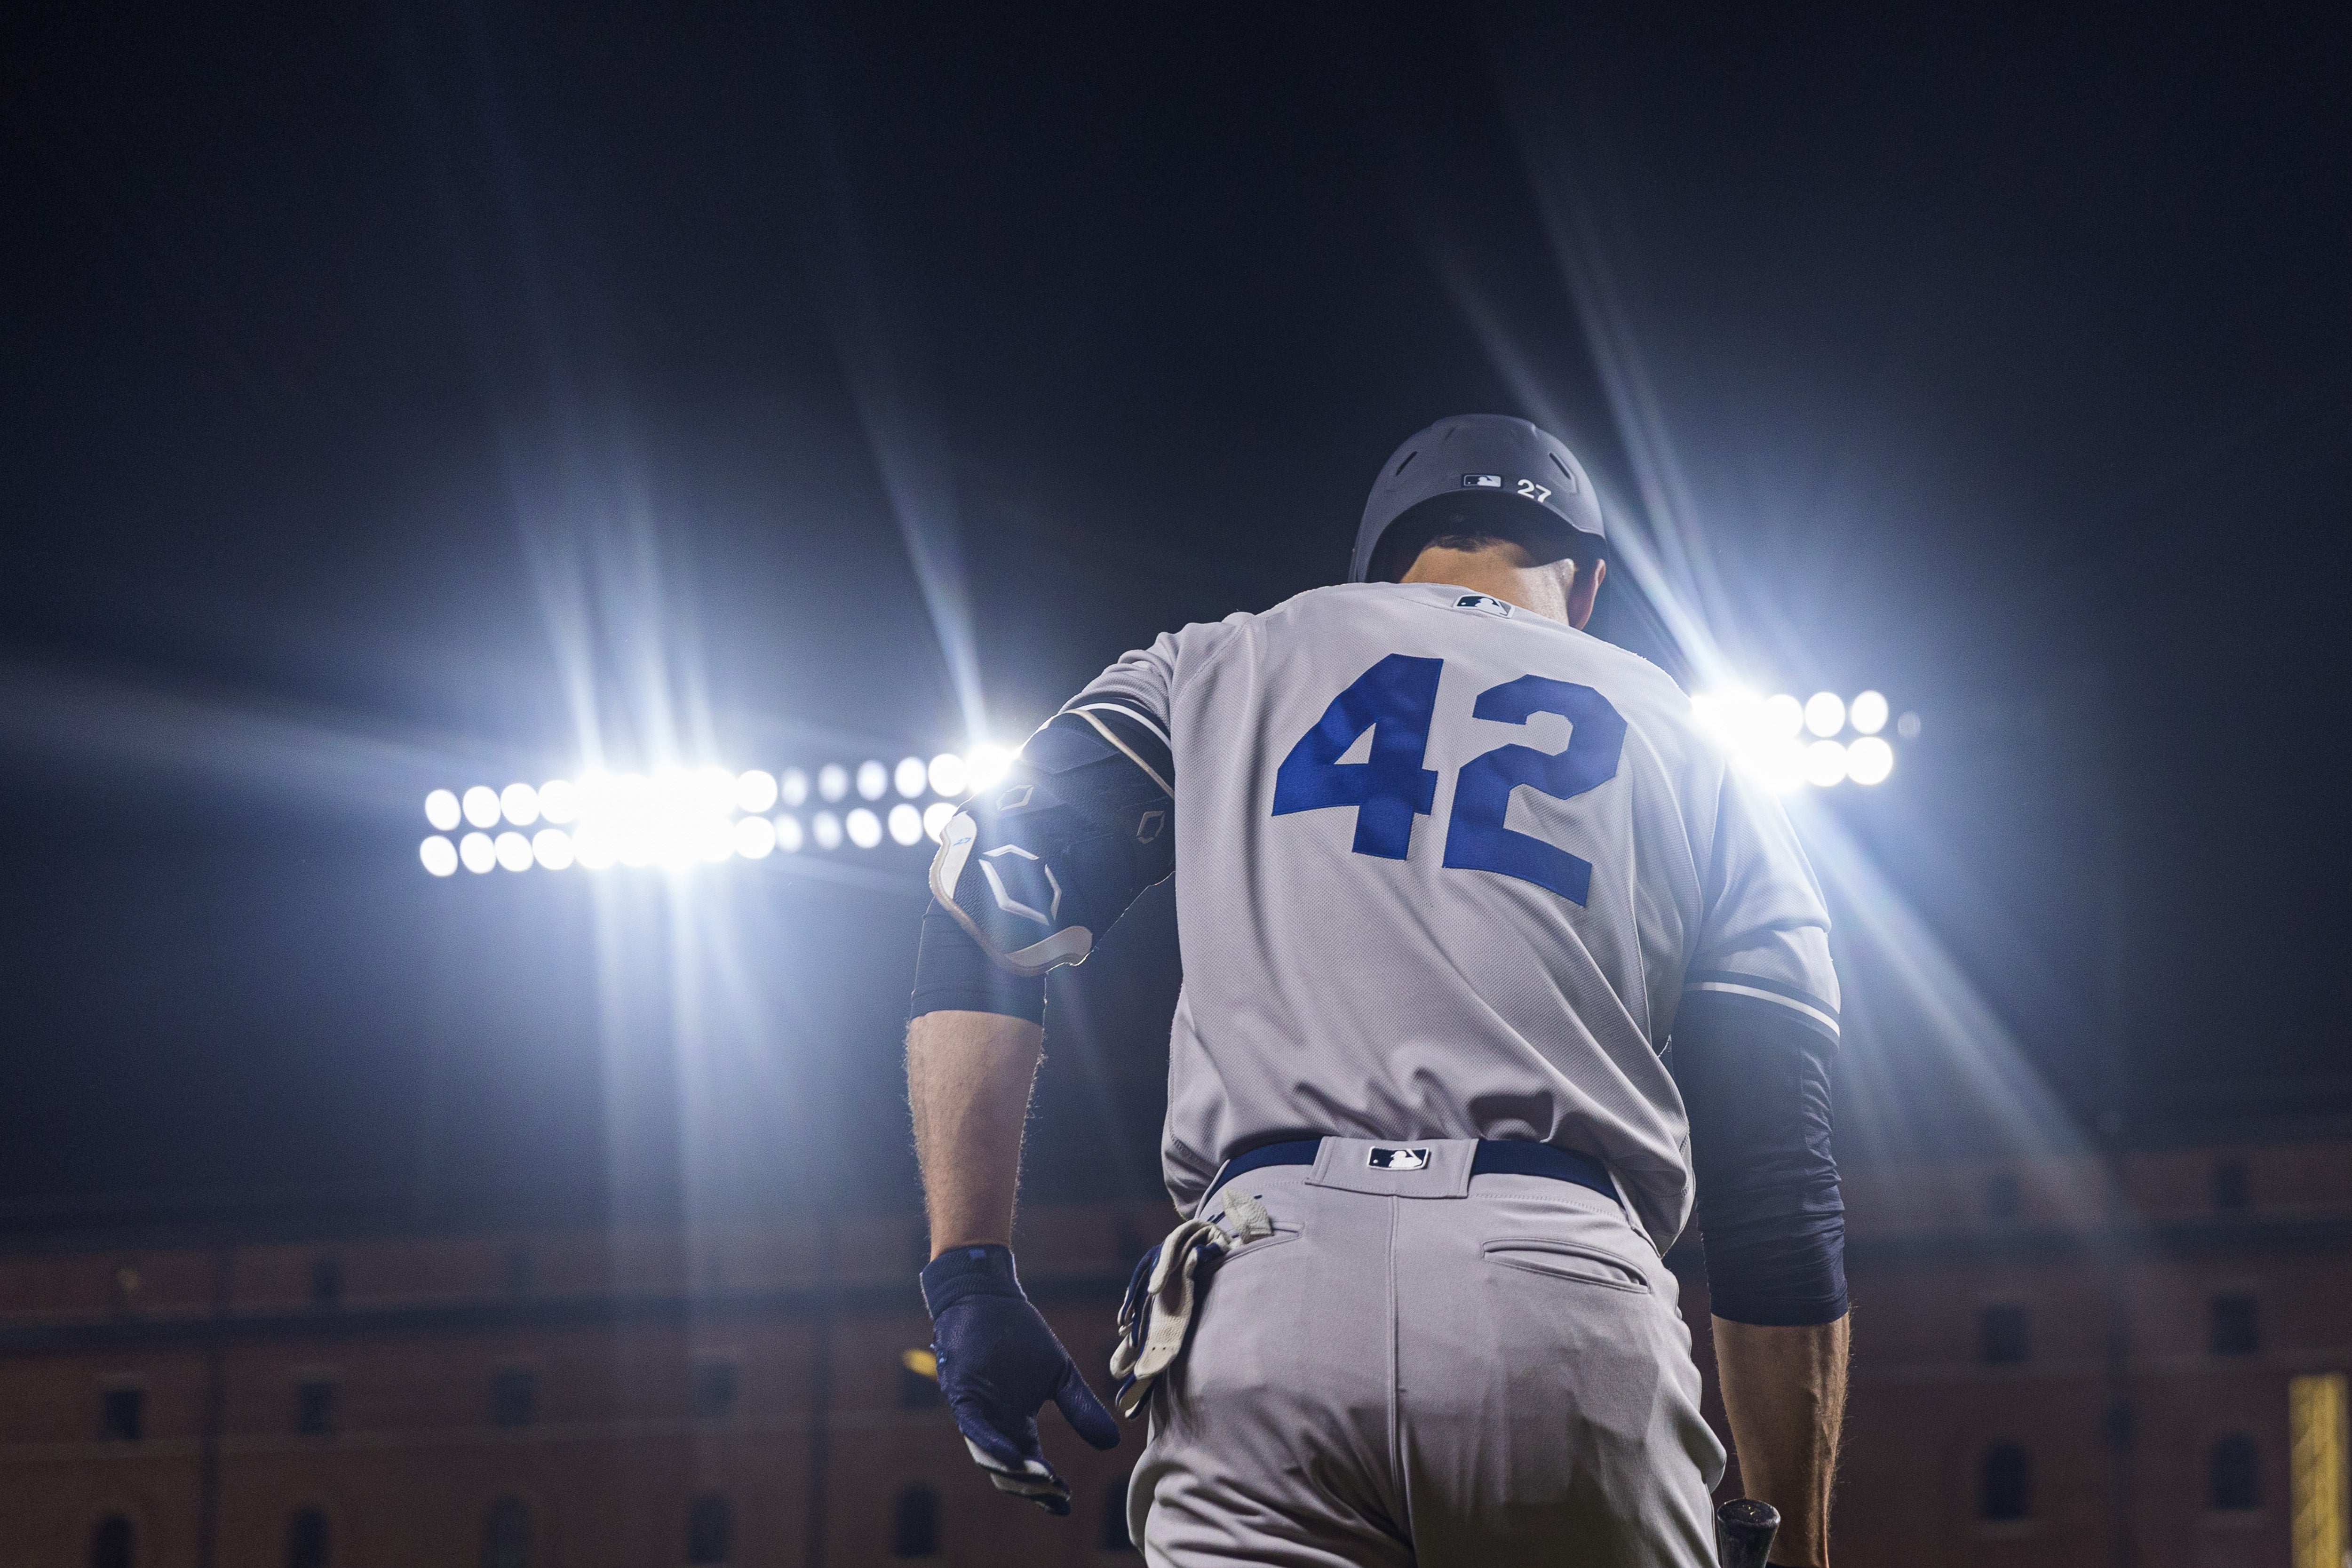 Baseball player showing back of jersey with #42 in honor of Jackie Robinson